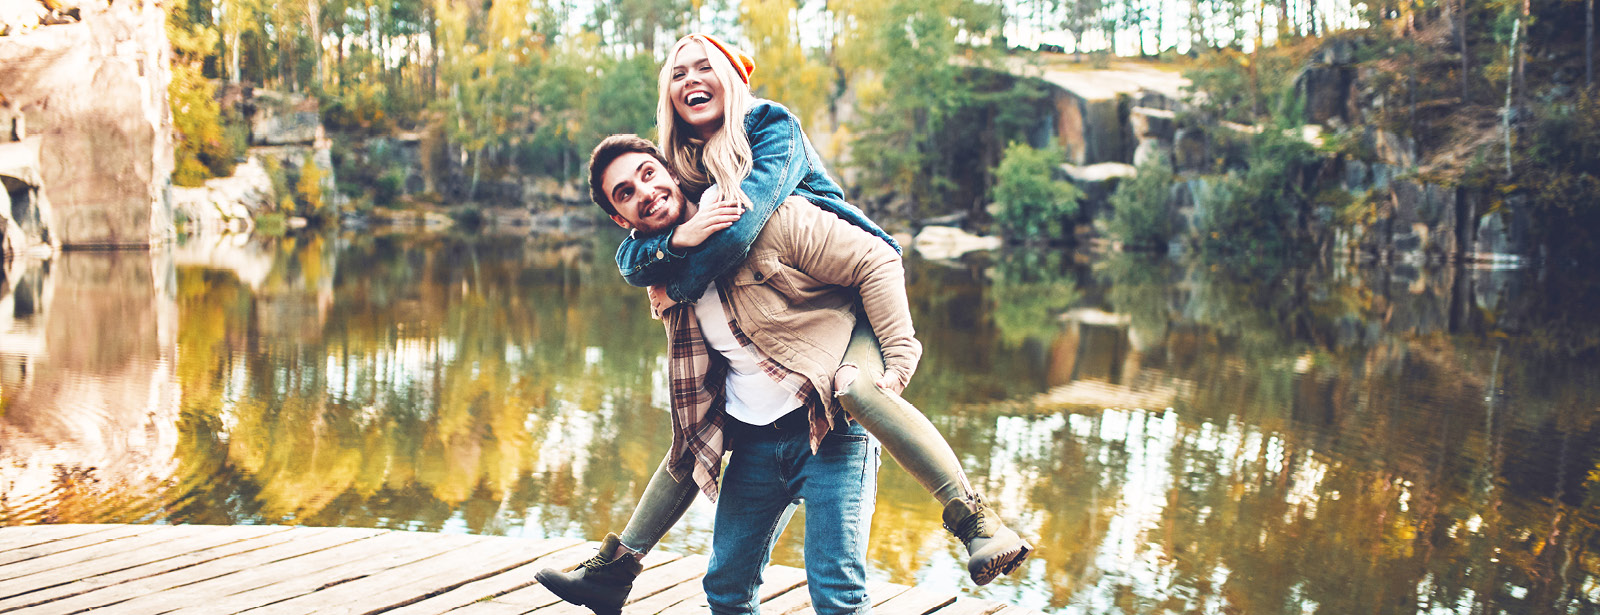 man in brown jacket giving a woman in a yellow beanie a piggy back on a dock in the fall